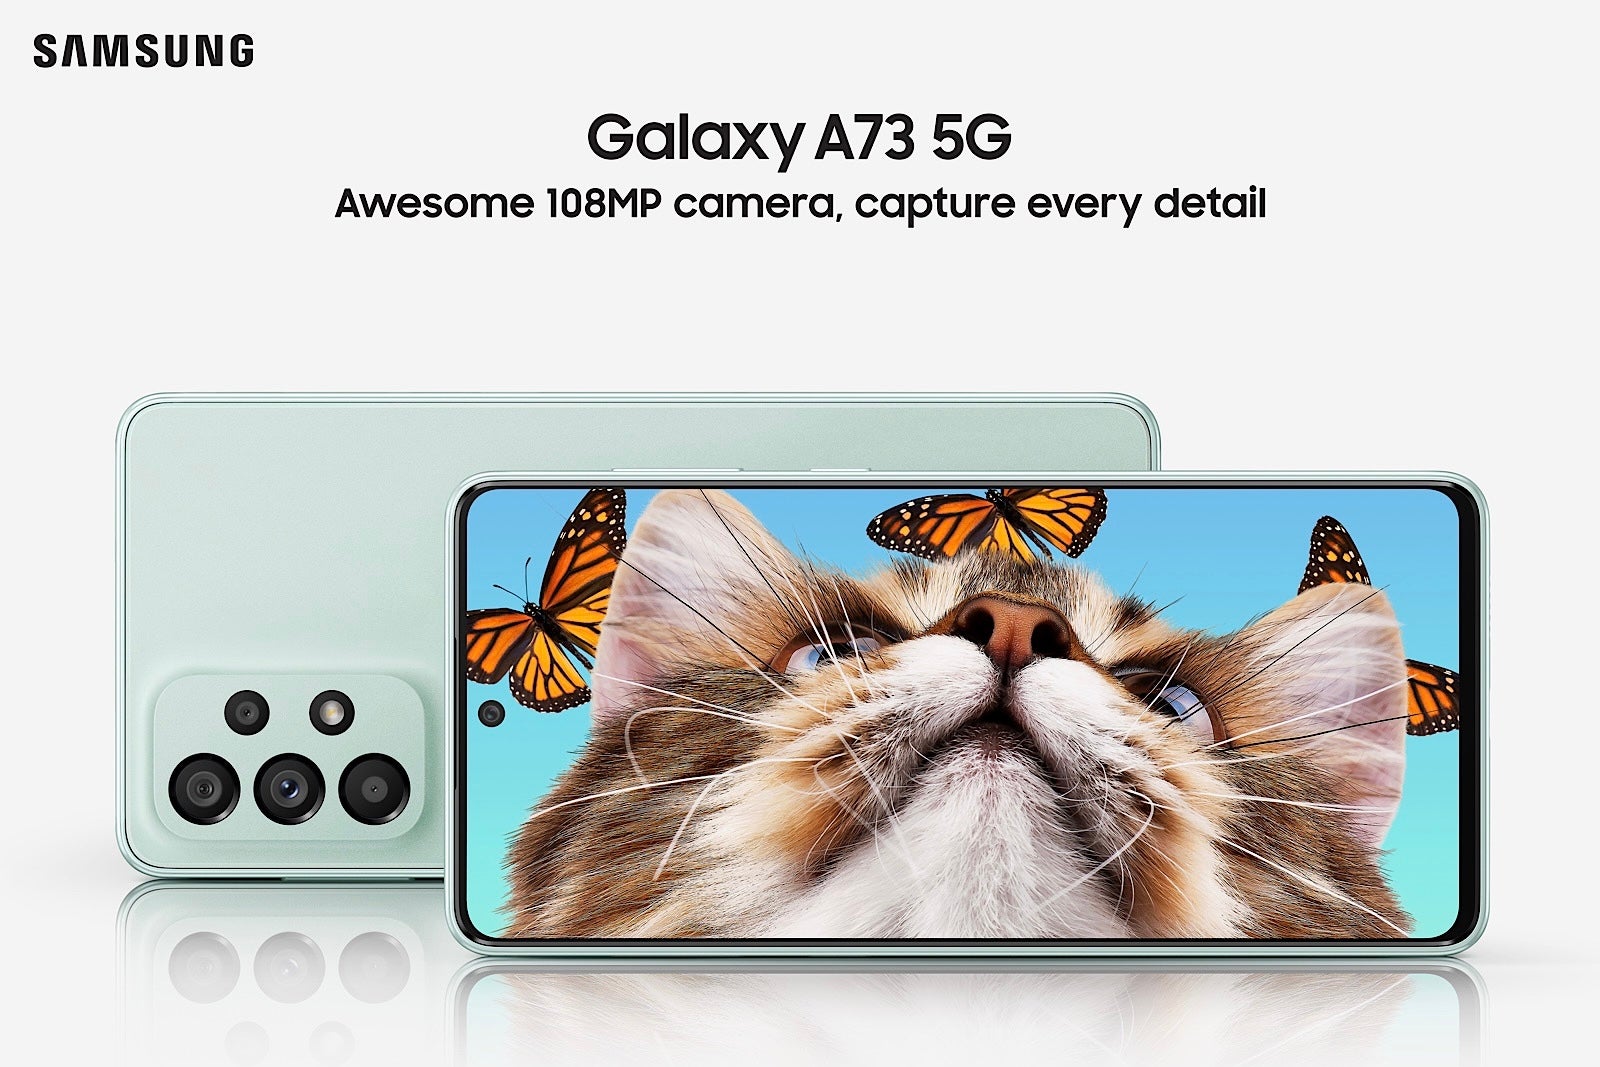 The Samsung Galaxy A73 also got a sneaky announcement today